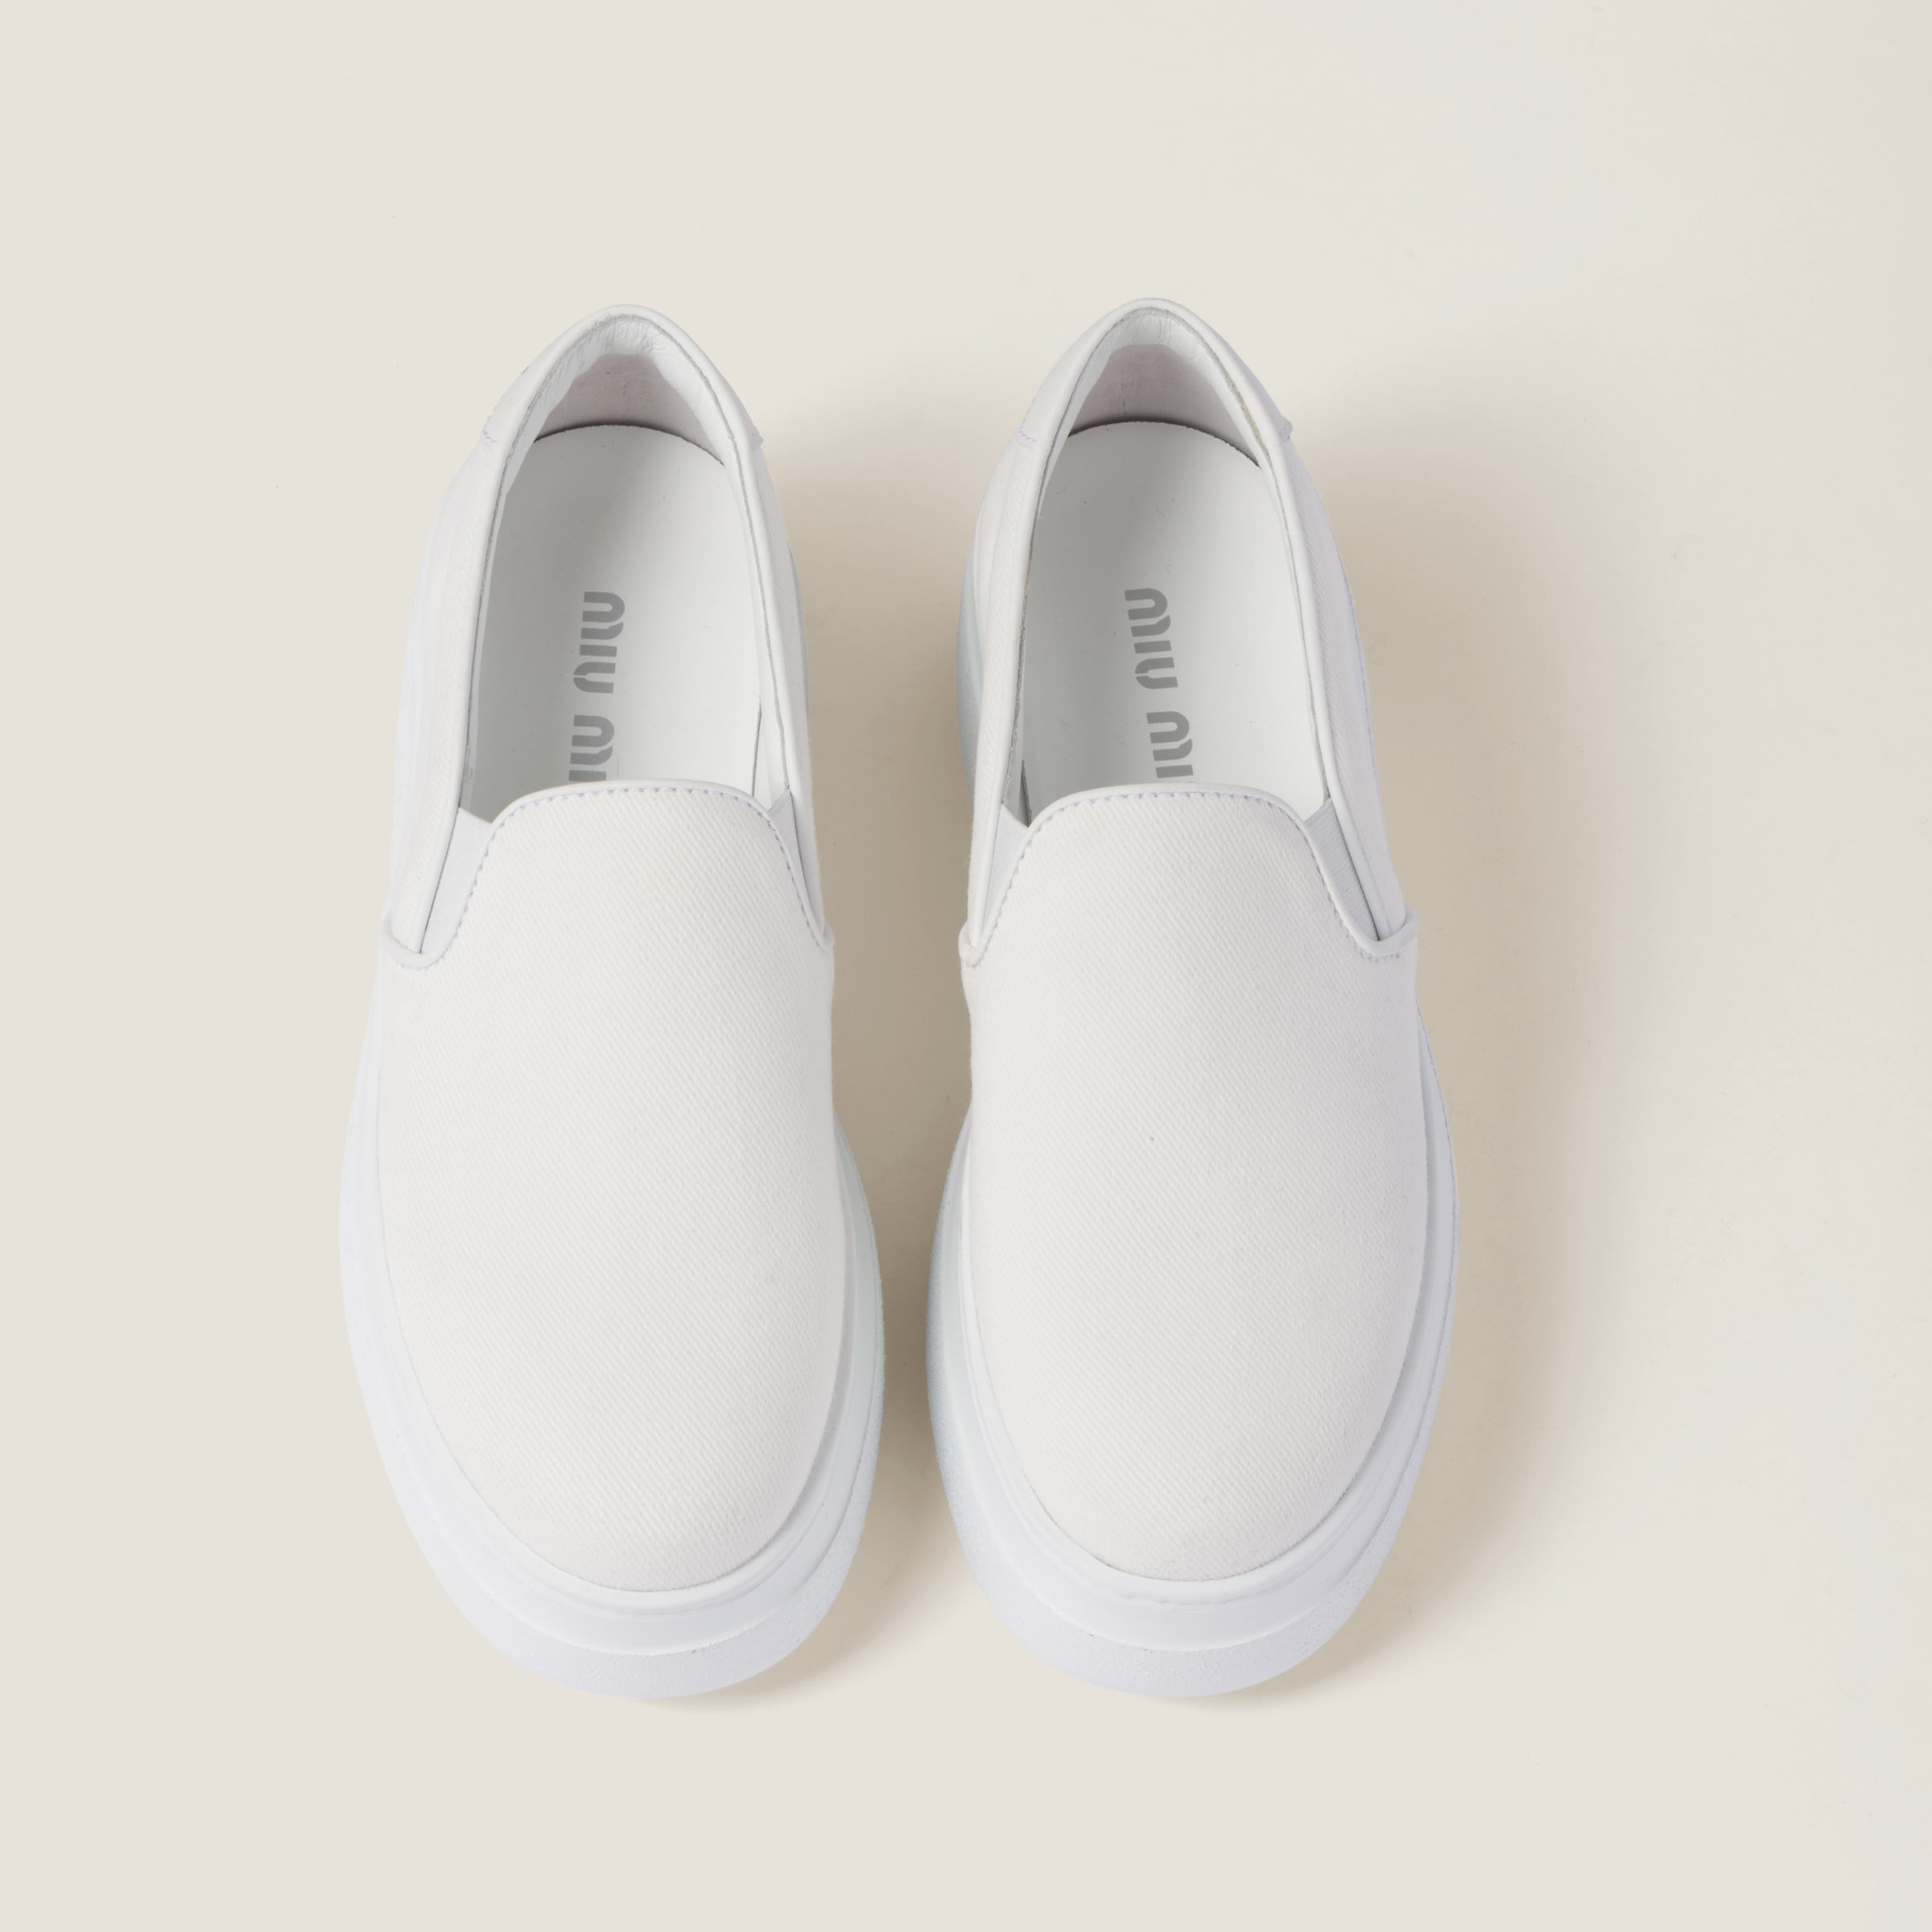 Washed cotton drill sneakers - 4